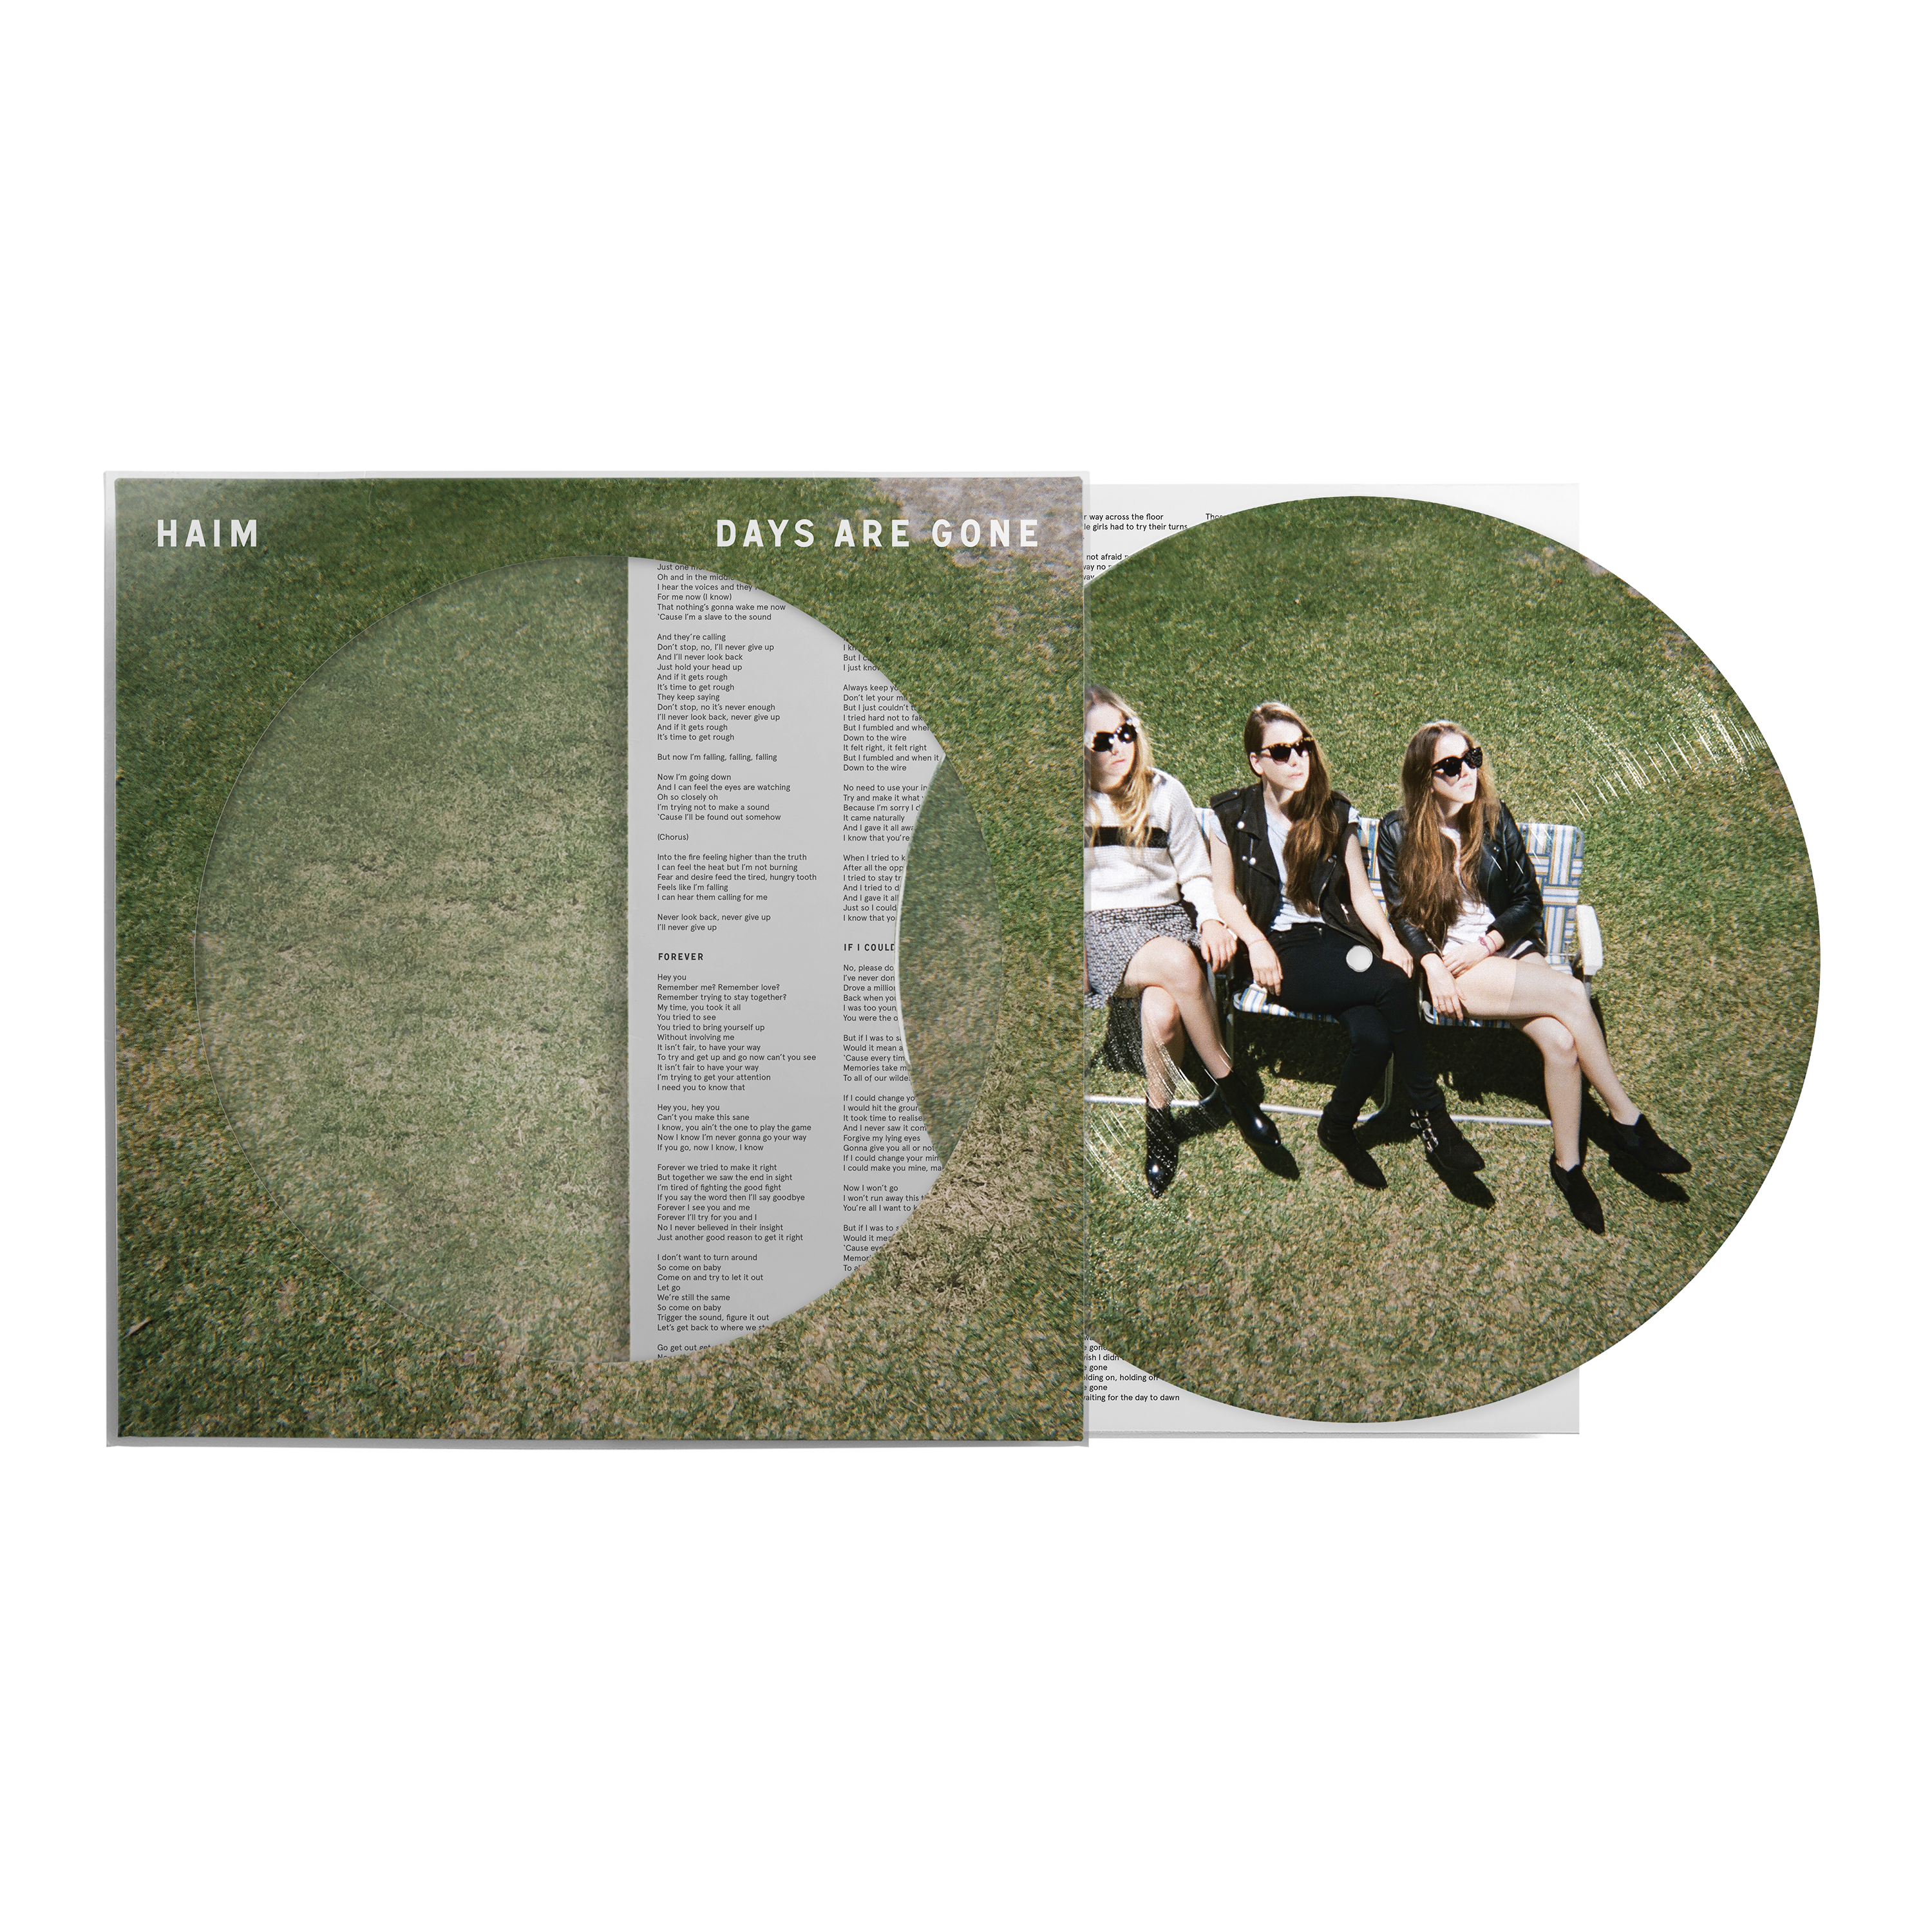 Days Are Gone (10th Anniversary): Picture Disc Vinyl LP, Cassette + Signed Art Card